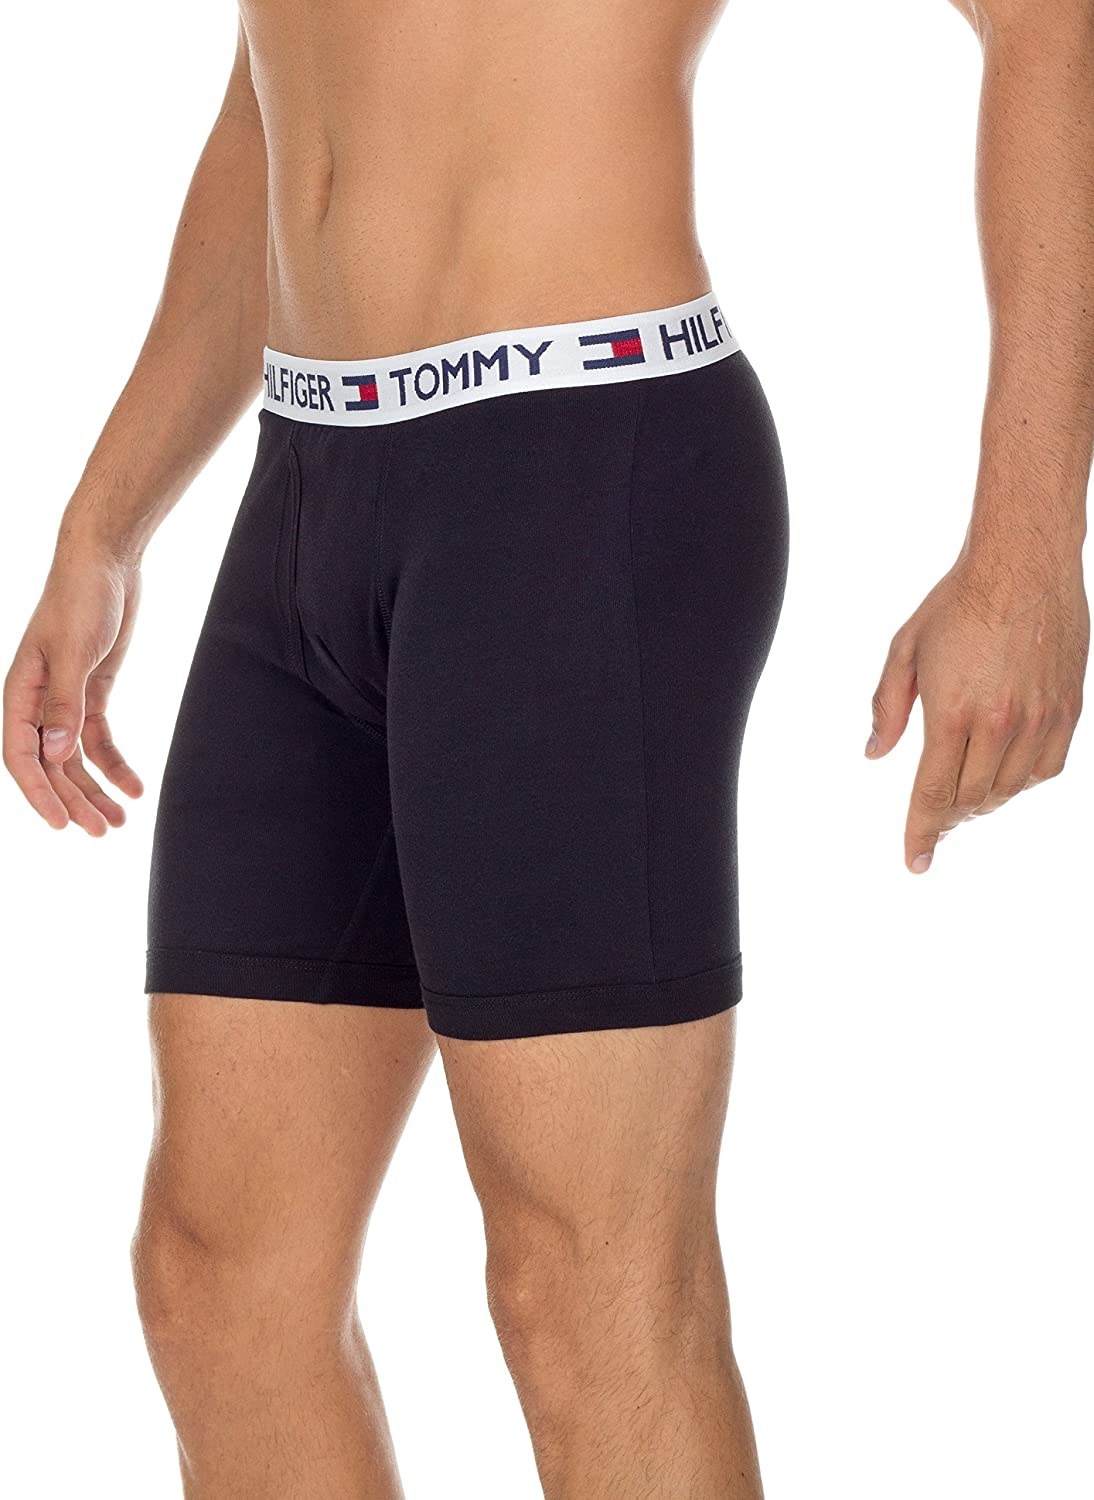 A person wearing boxer briefs